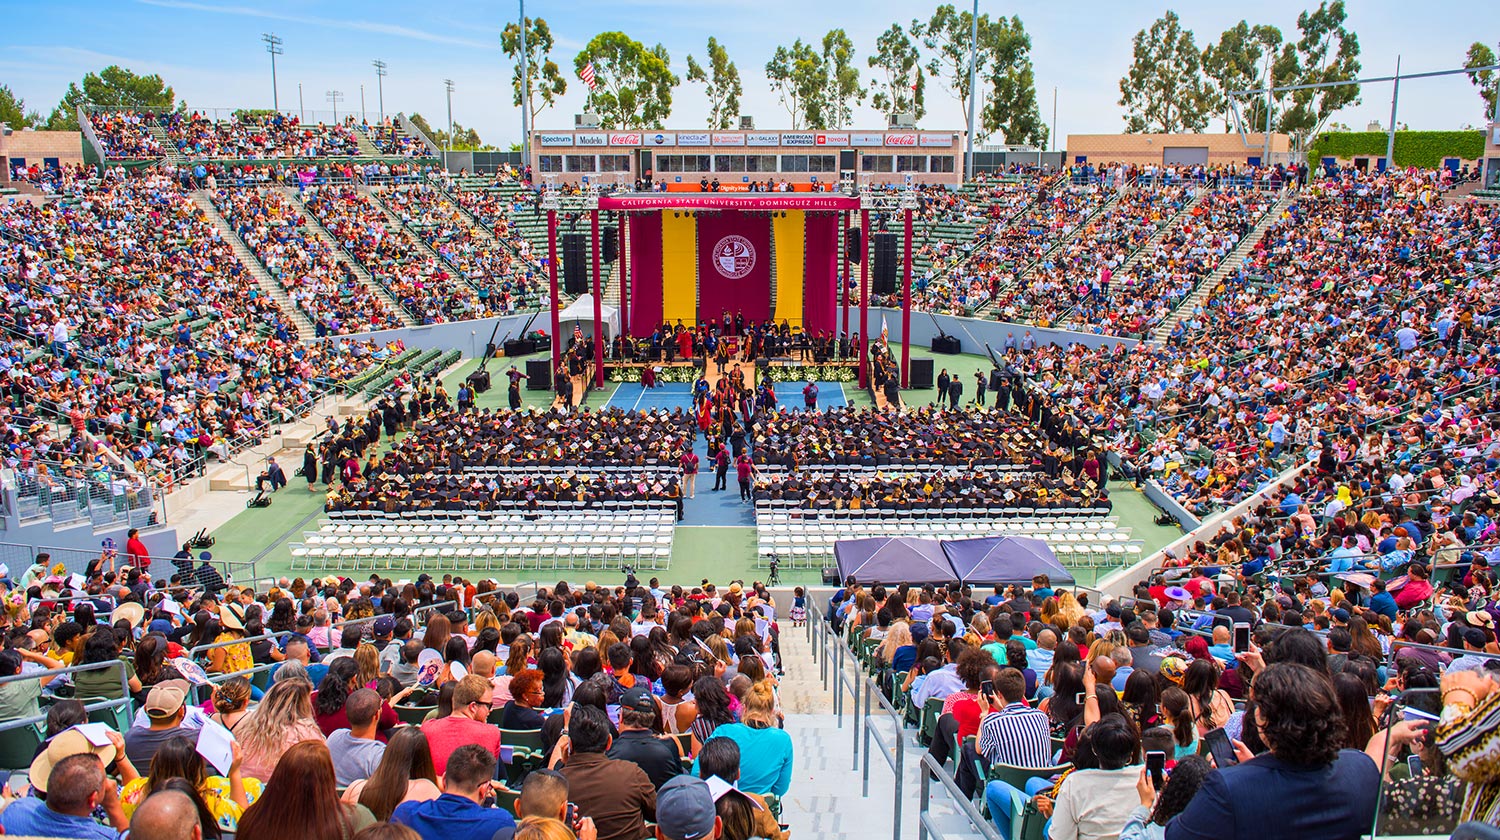 CSUDH's 2019 Commencement took place in the Dignity Health Sport Park's Tennis Stadium.